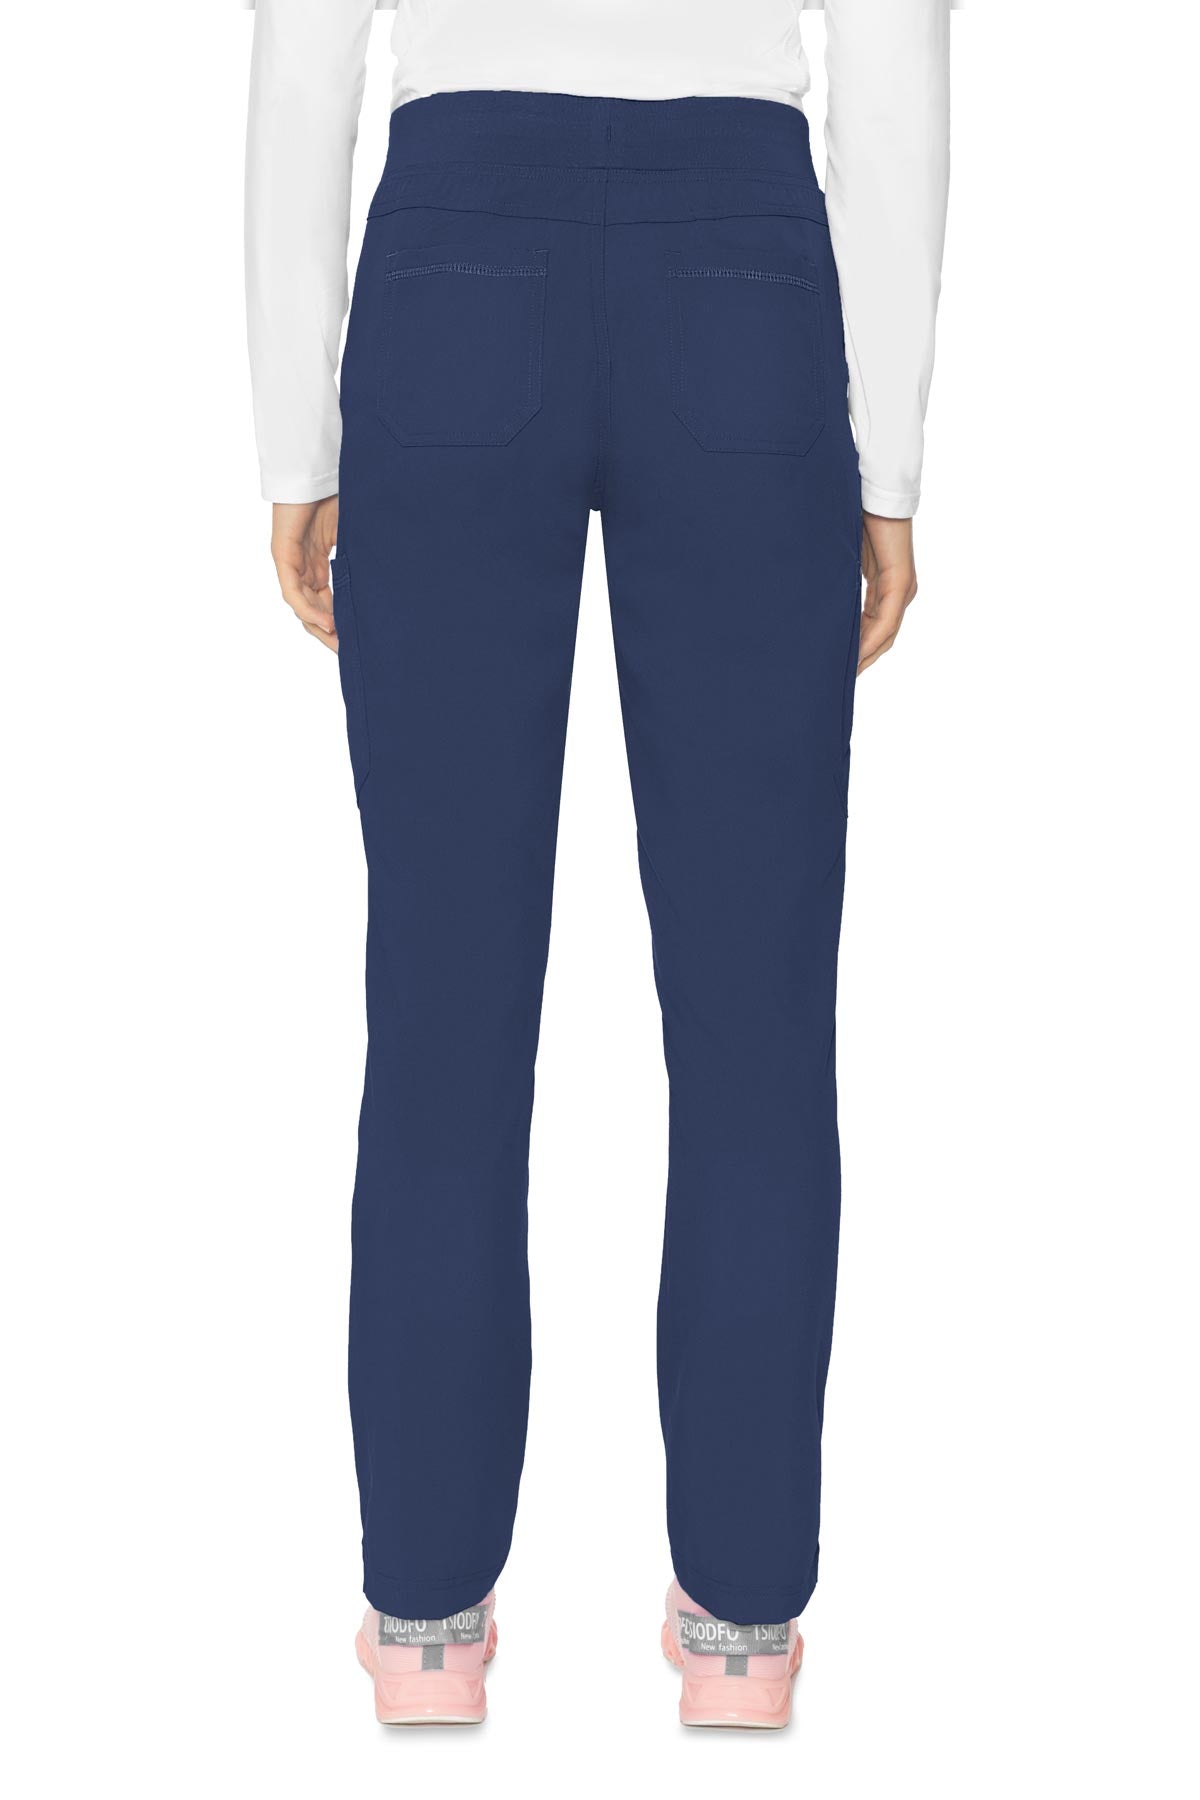 Yoga 2 Cargo Pocket Pant - Touch - Med Couture - Brands - Metro